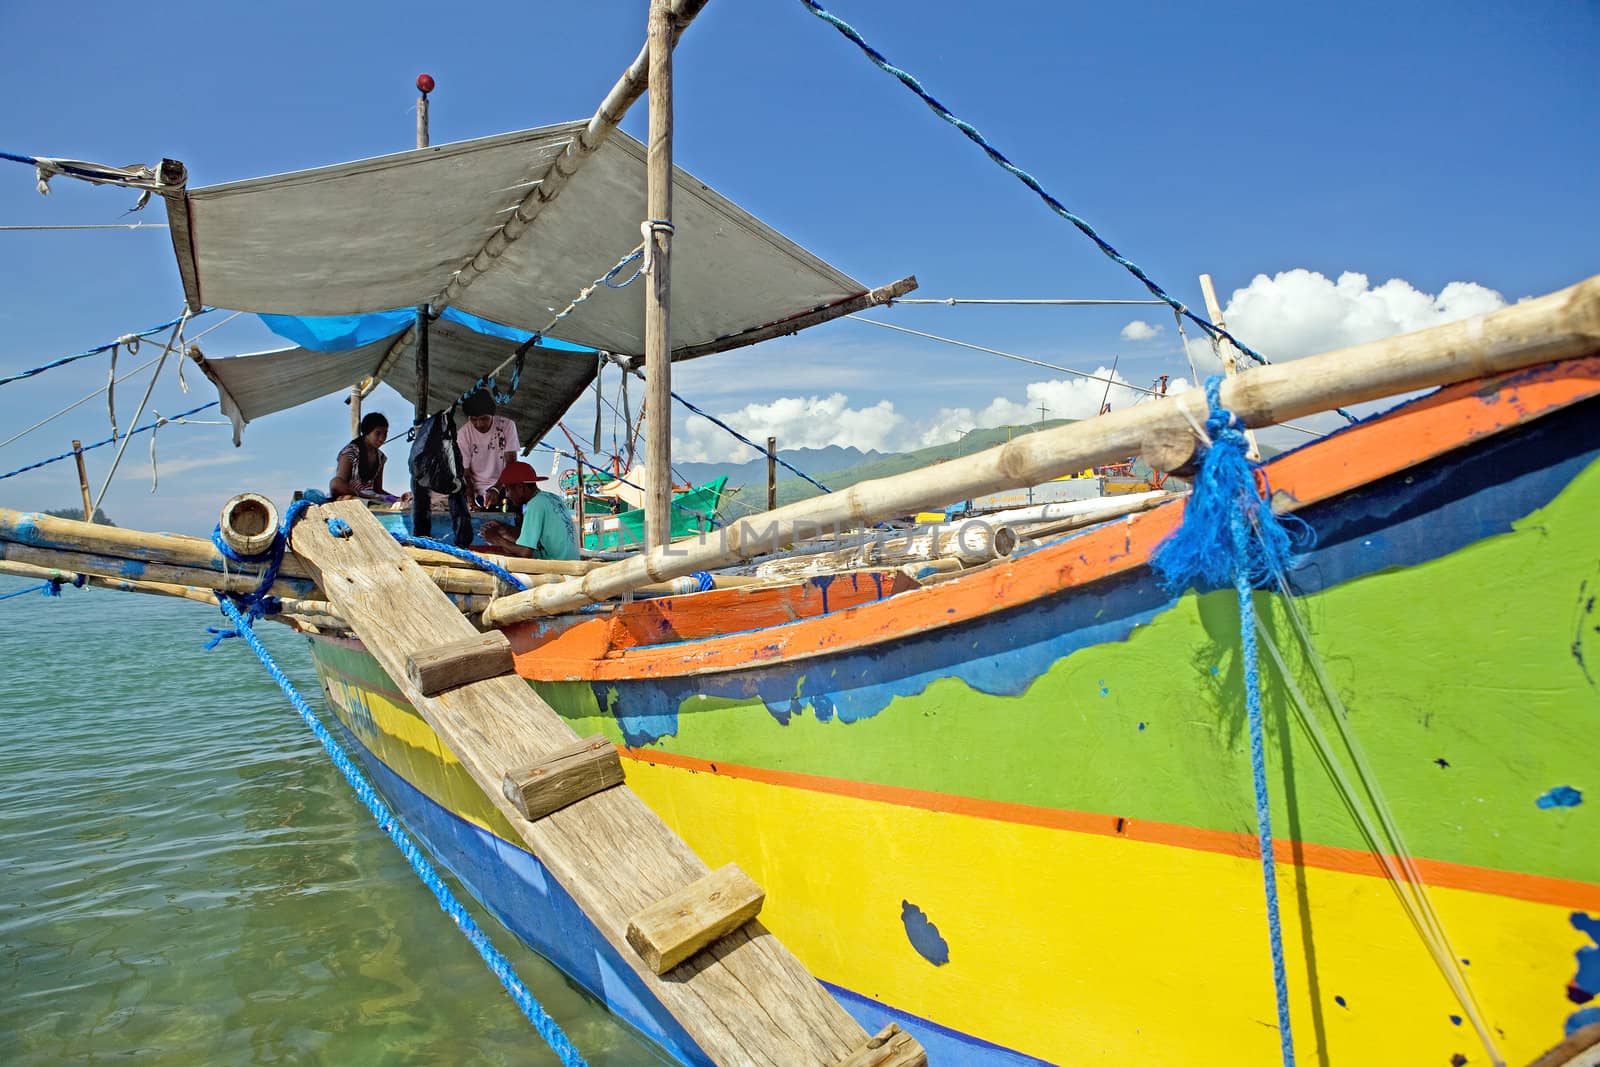 Filipino family living on their fishing boat in Subic Town, Philippine Islands. These boats are used for fishing and for local transportation. The boats are called outriggers, canoes, pump boat and bangka.